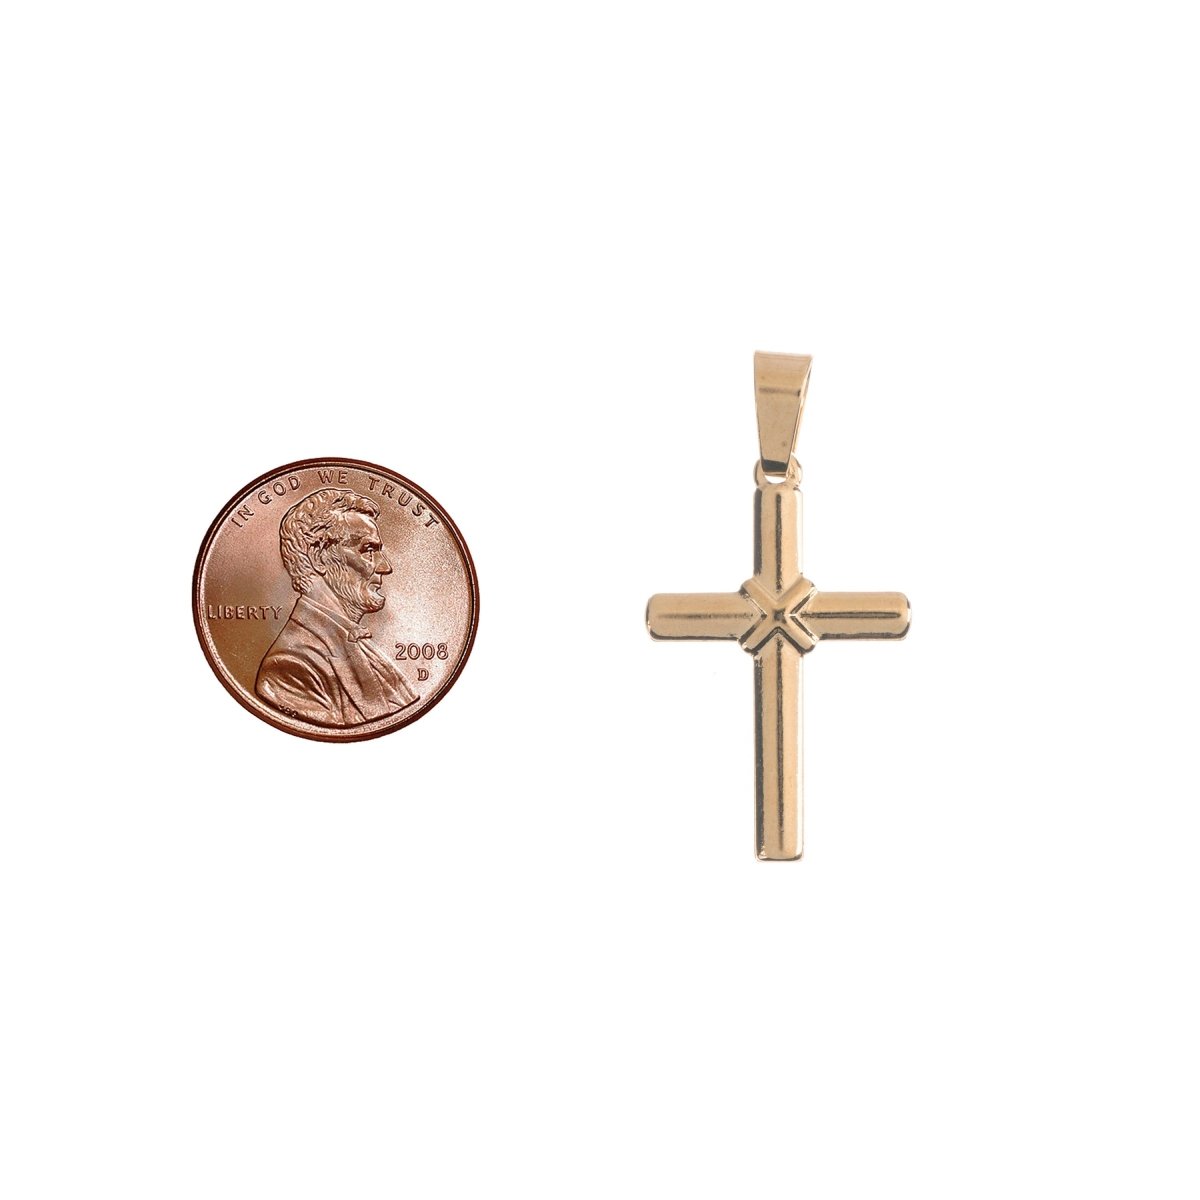 DEL- 18K Gold Filled Simplistic Modern Cross, Jesus Christ God, Women Ladies Bails Findings for Necklace Charm Pendant Jewelry Making Supplies - DLUXCA